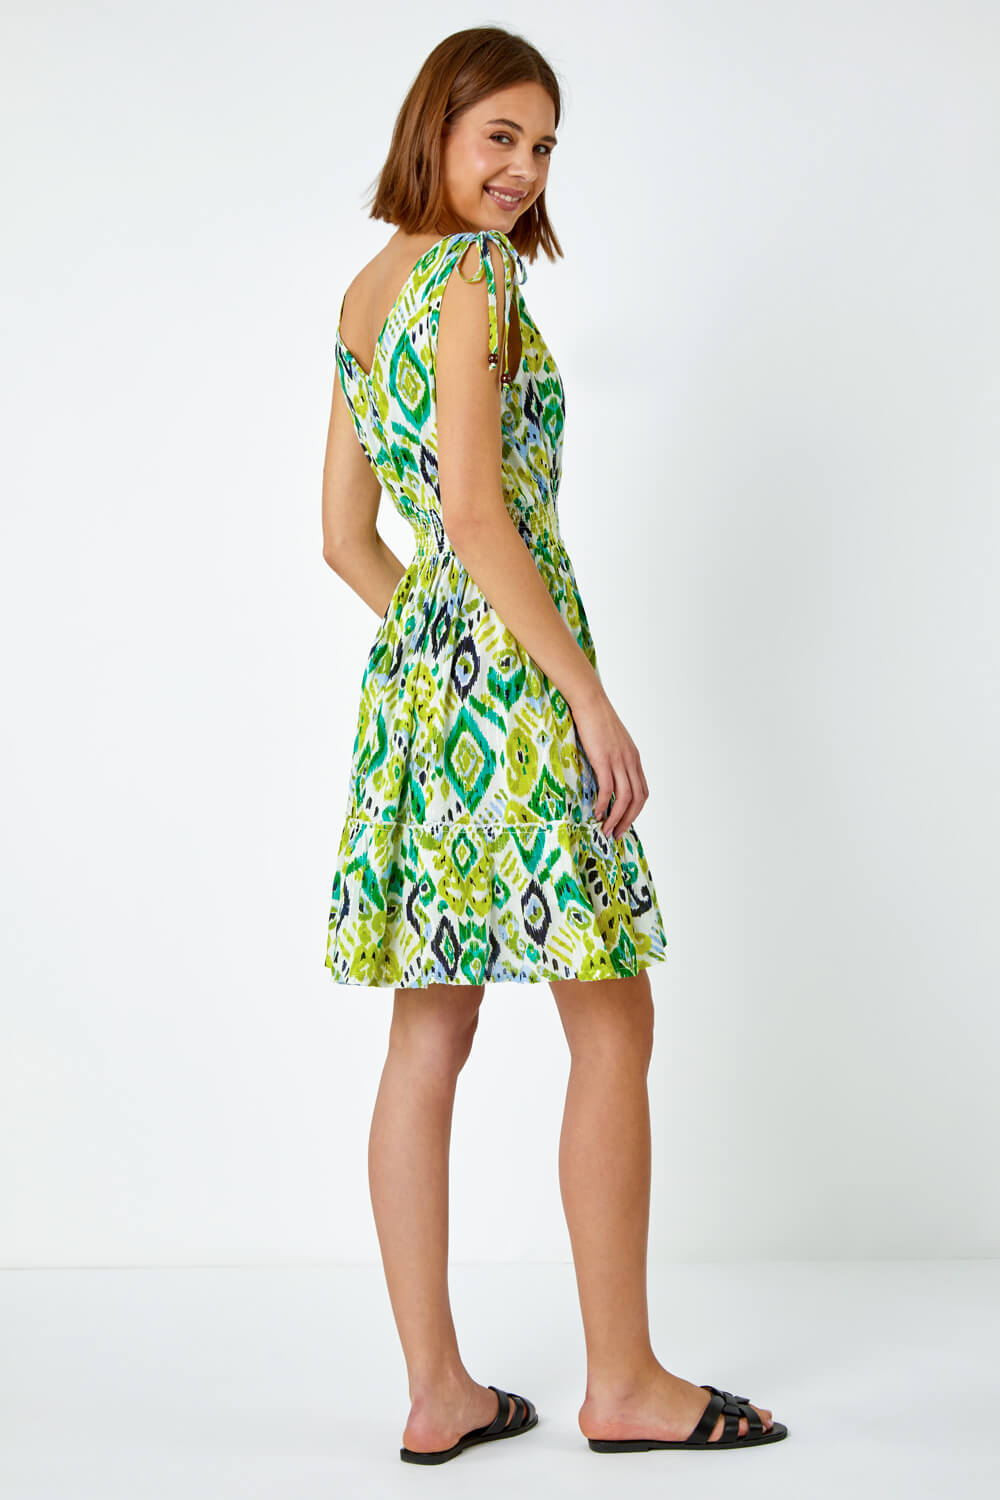 Lime Aztec Print Shirred Stretch Dress, Image 4 of 6